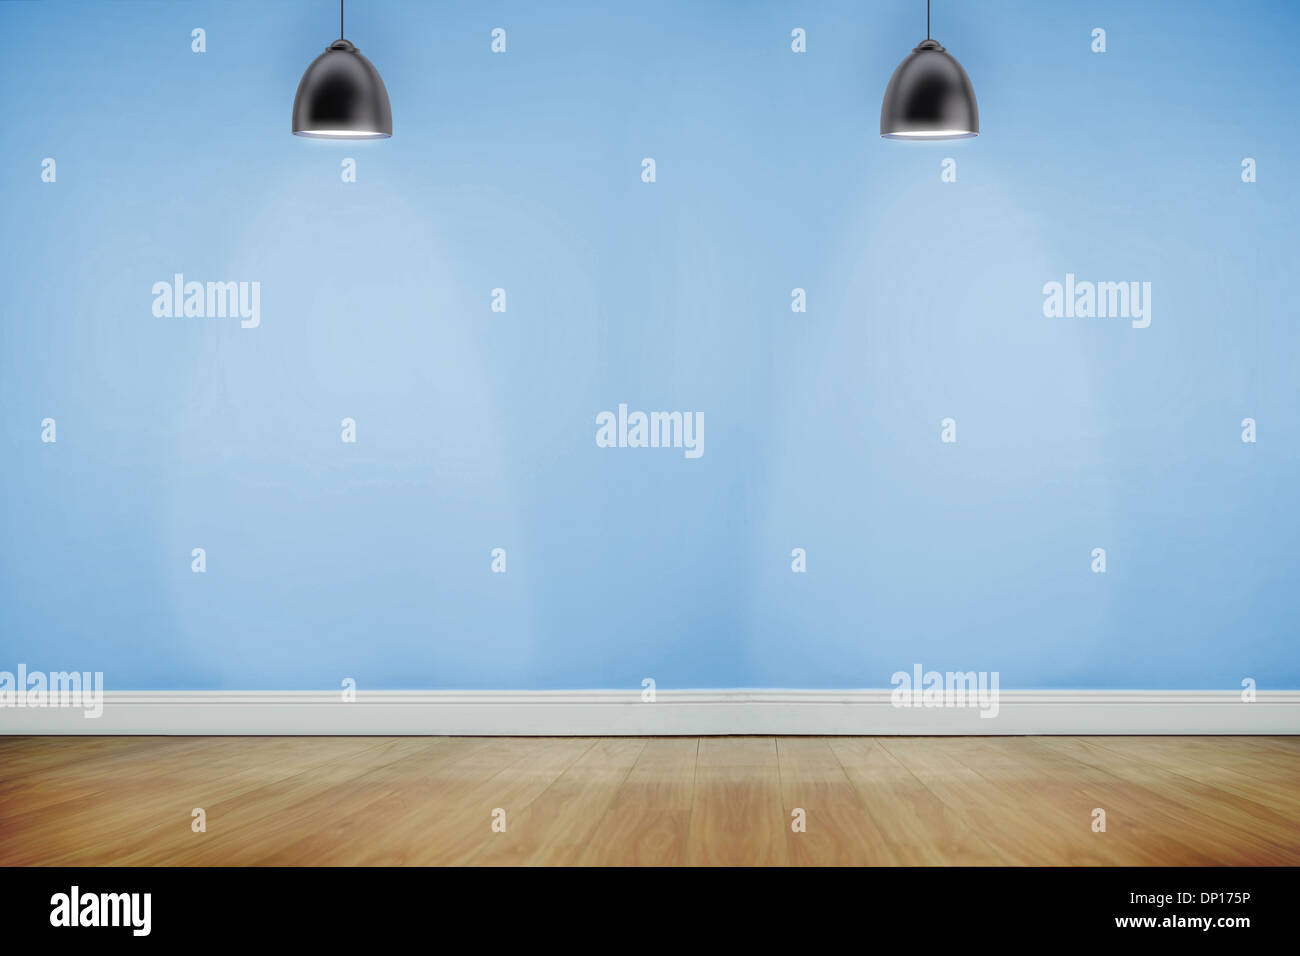 Room with wooden floor lighted with spotlights Stock Photo